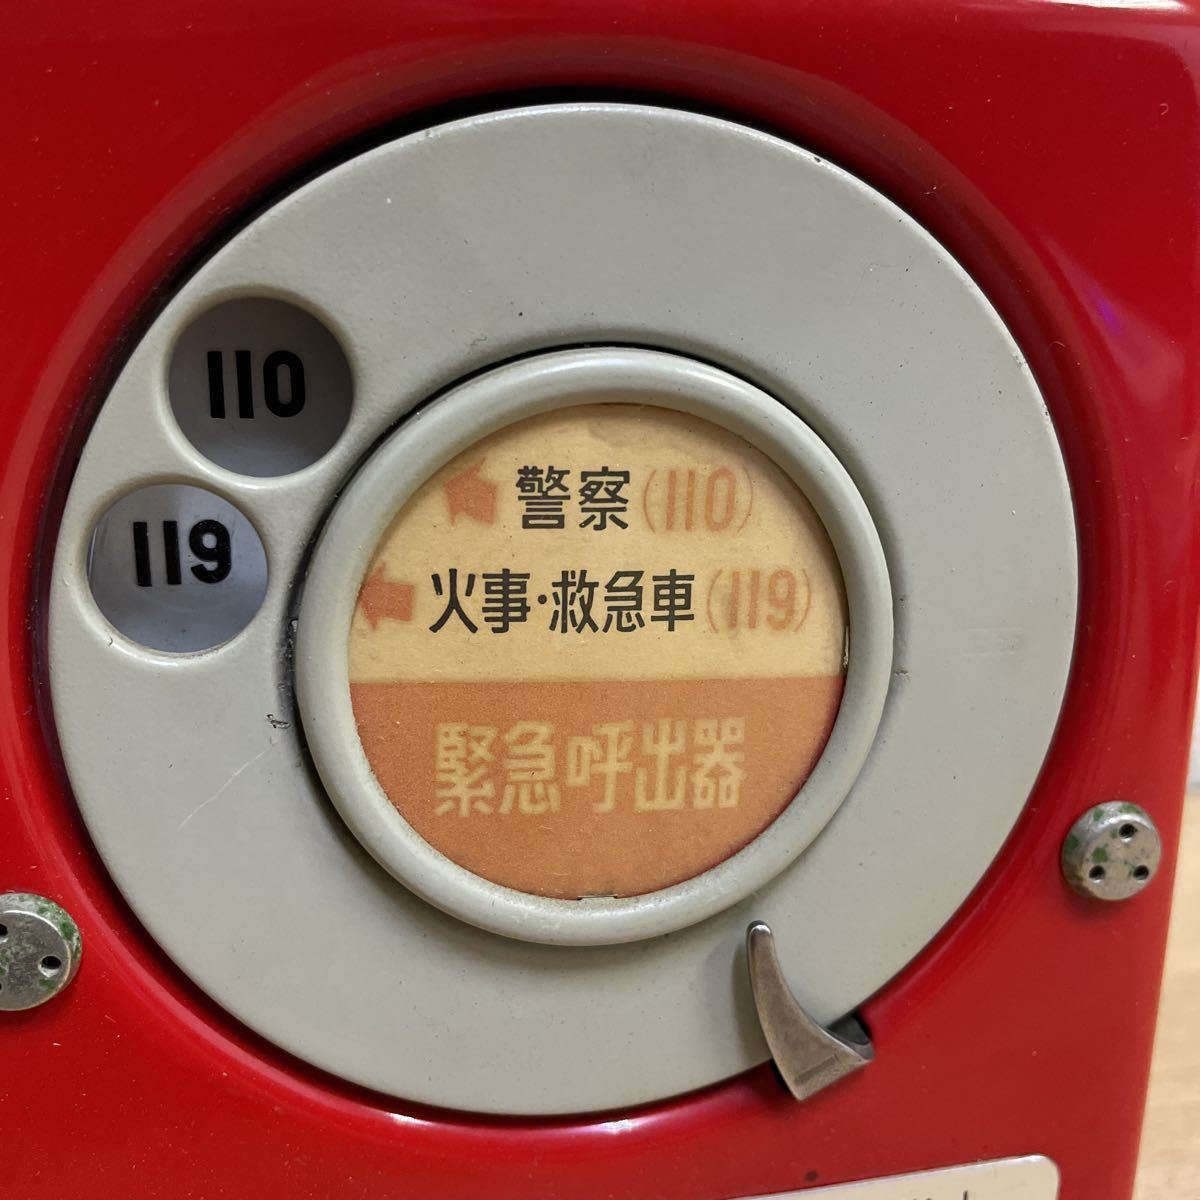 [ rare ] urgent .. machine urgent reporting equipment Japan electro- confidence telephone . company 110 number 119 number public telephone for urgent .. vessel Showa Retro red telephone cheap selling out start *